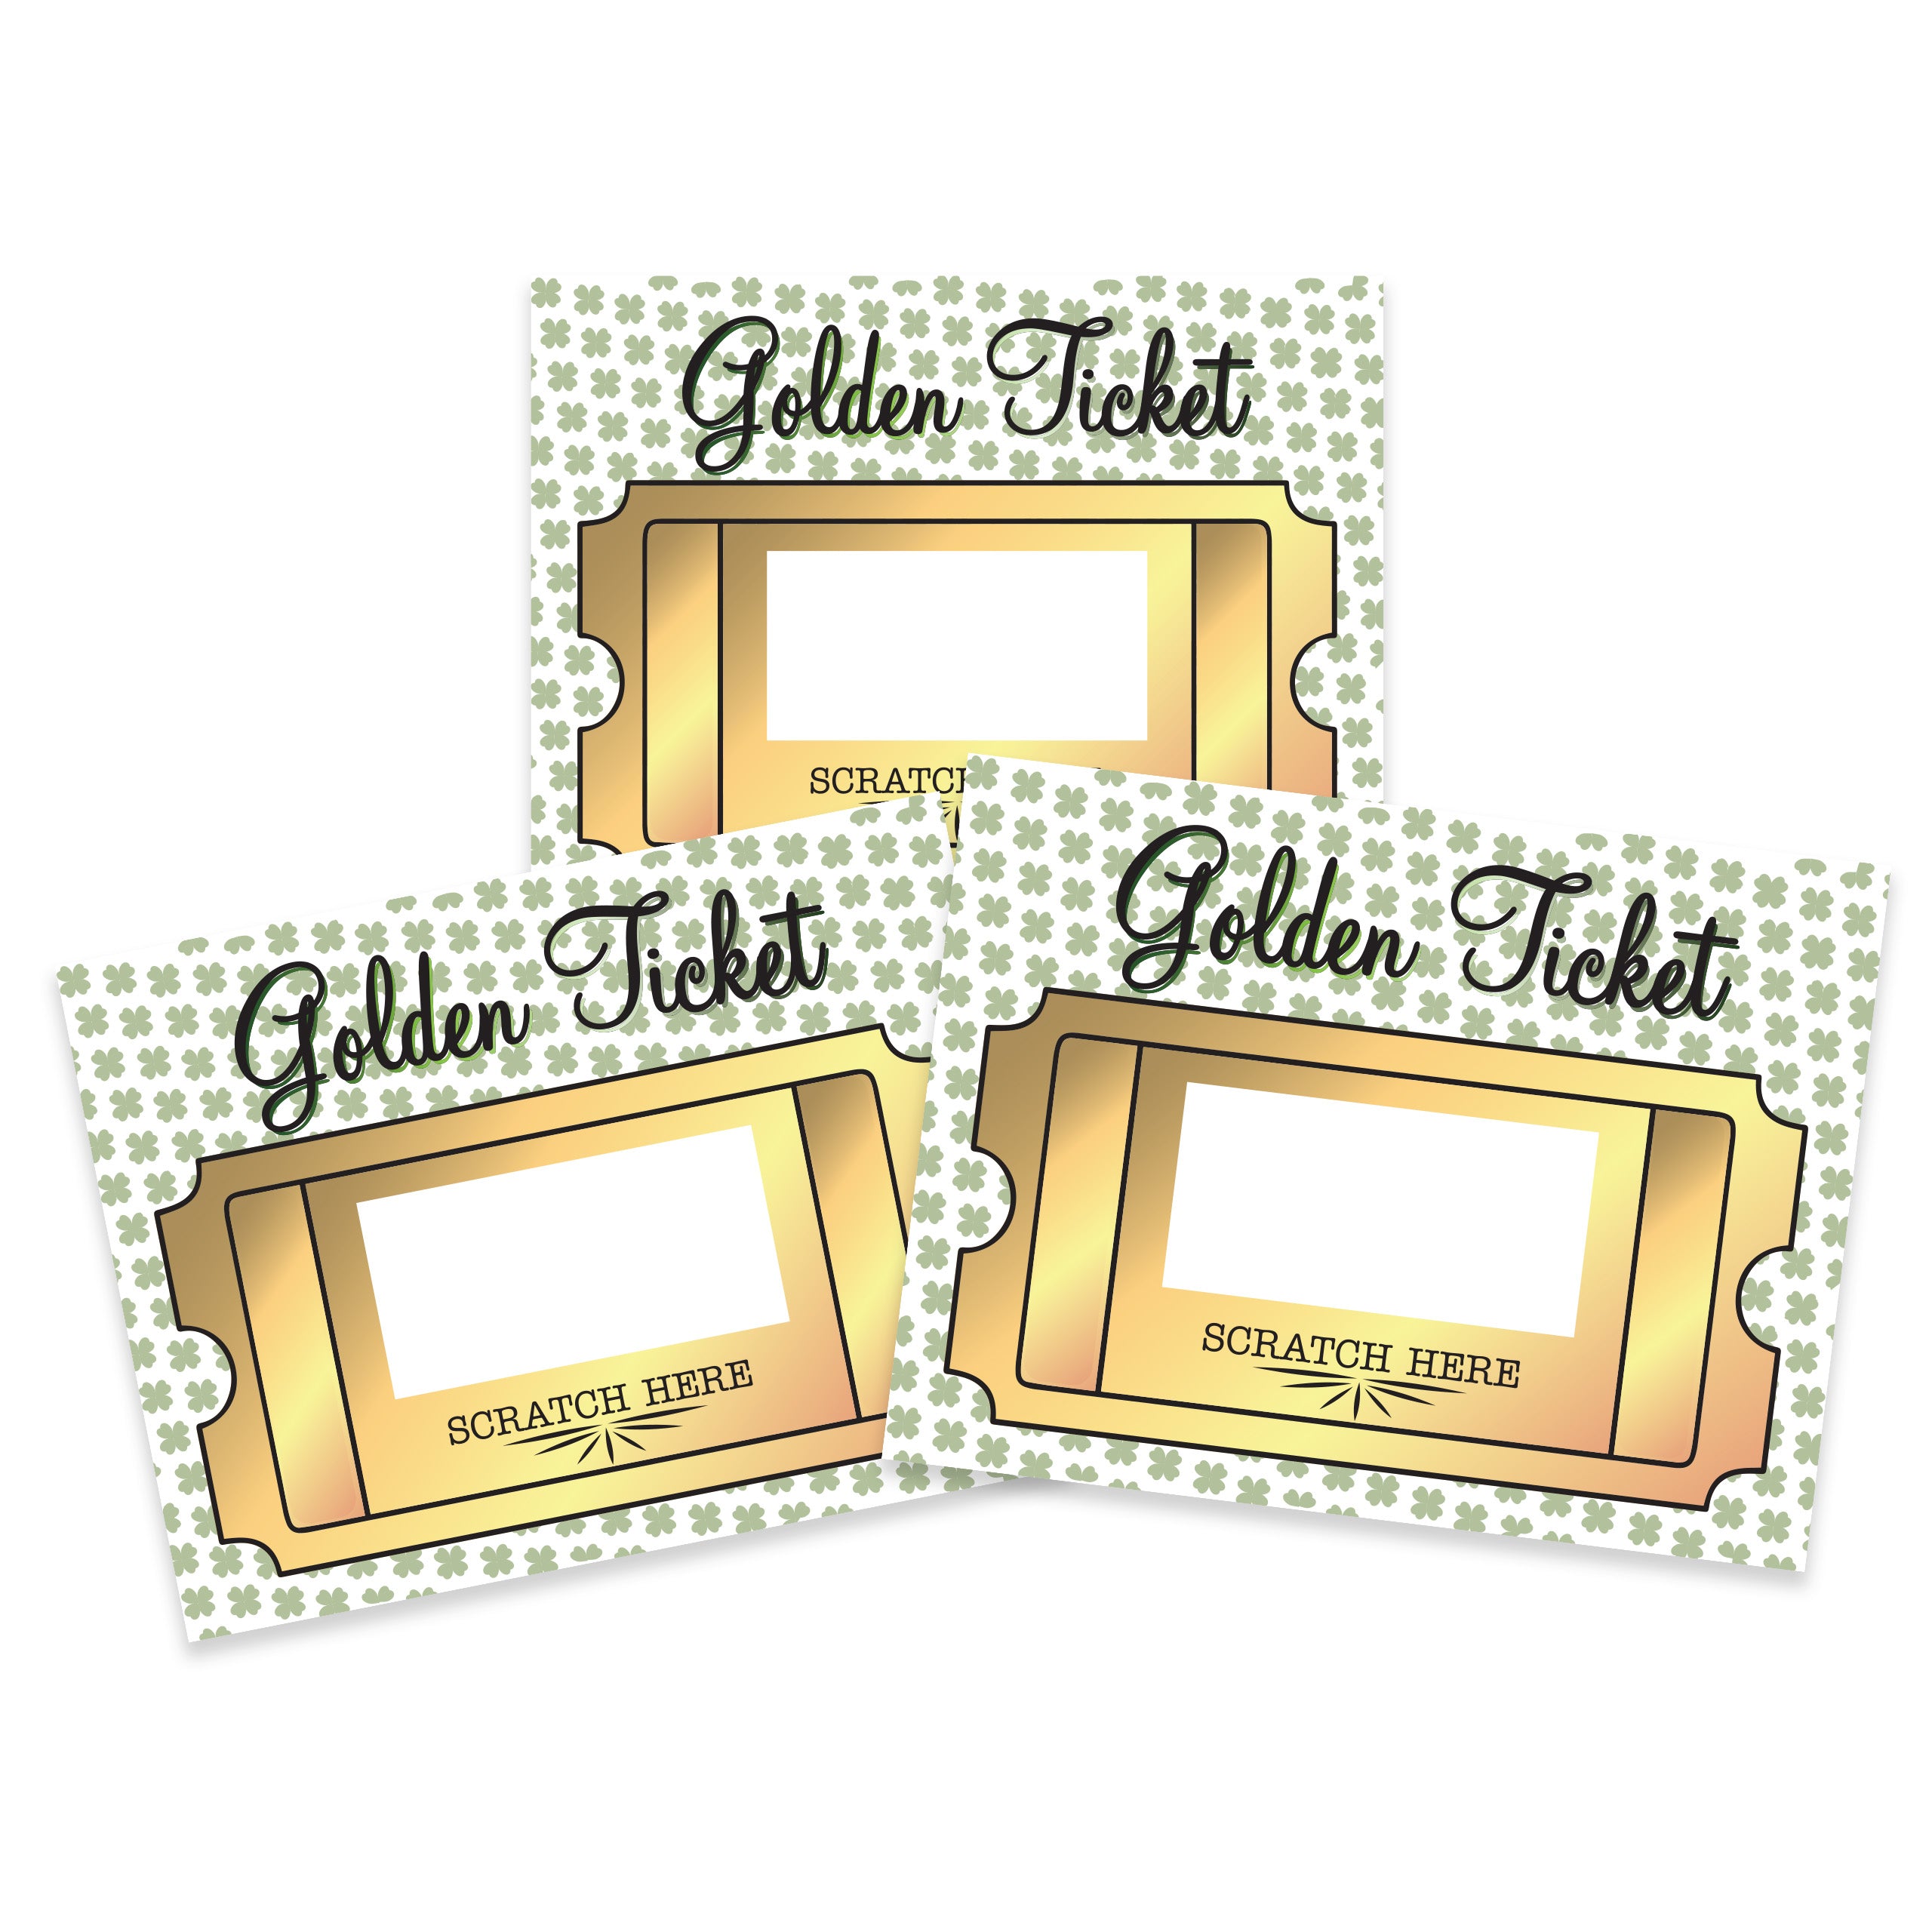 DIY Make Your Own Scratch Off Golden Ticket Card St. Patrick's Day 20 Pack - My Scratch Offs